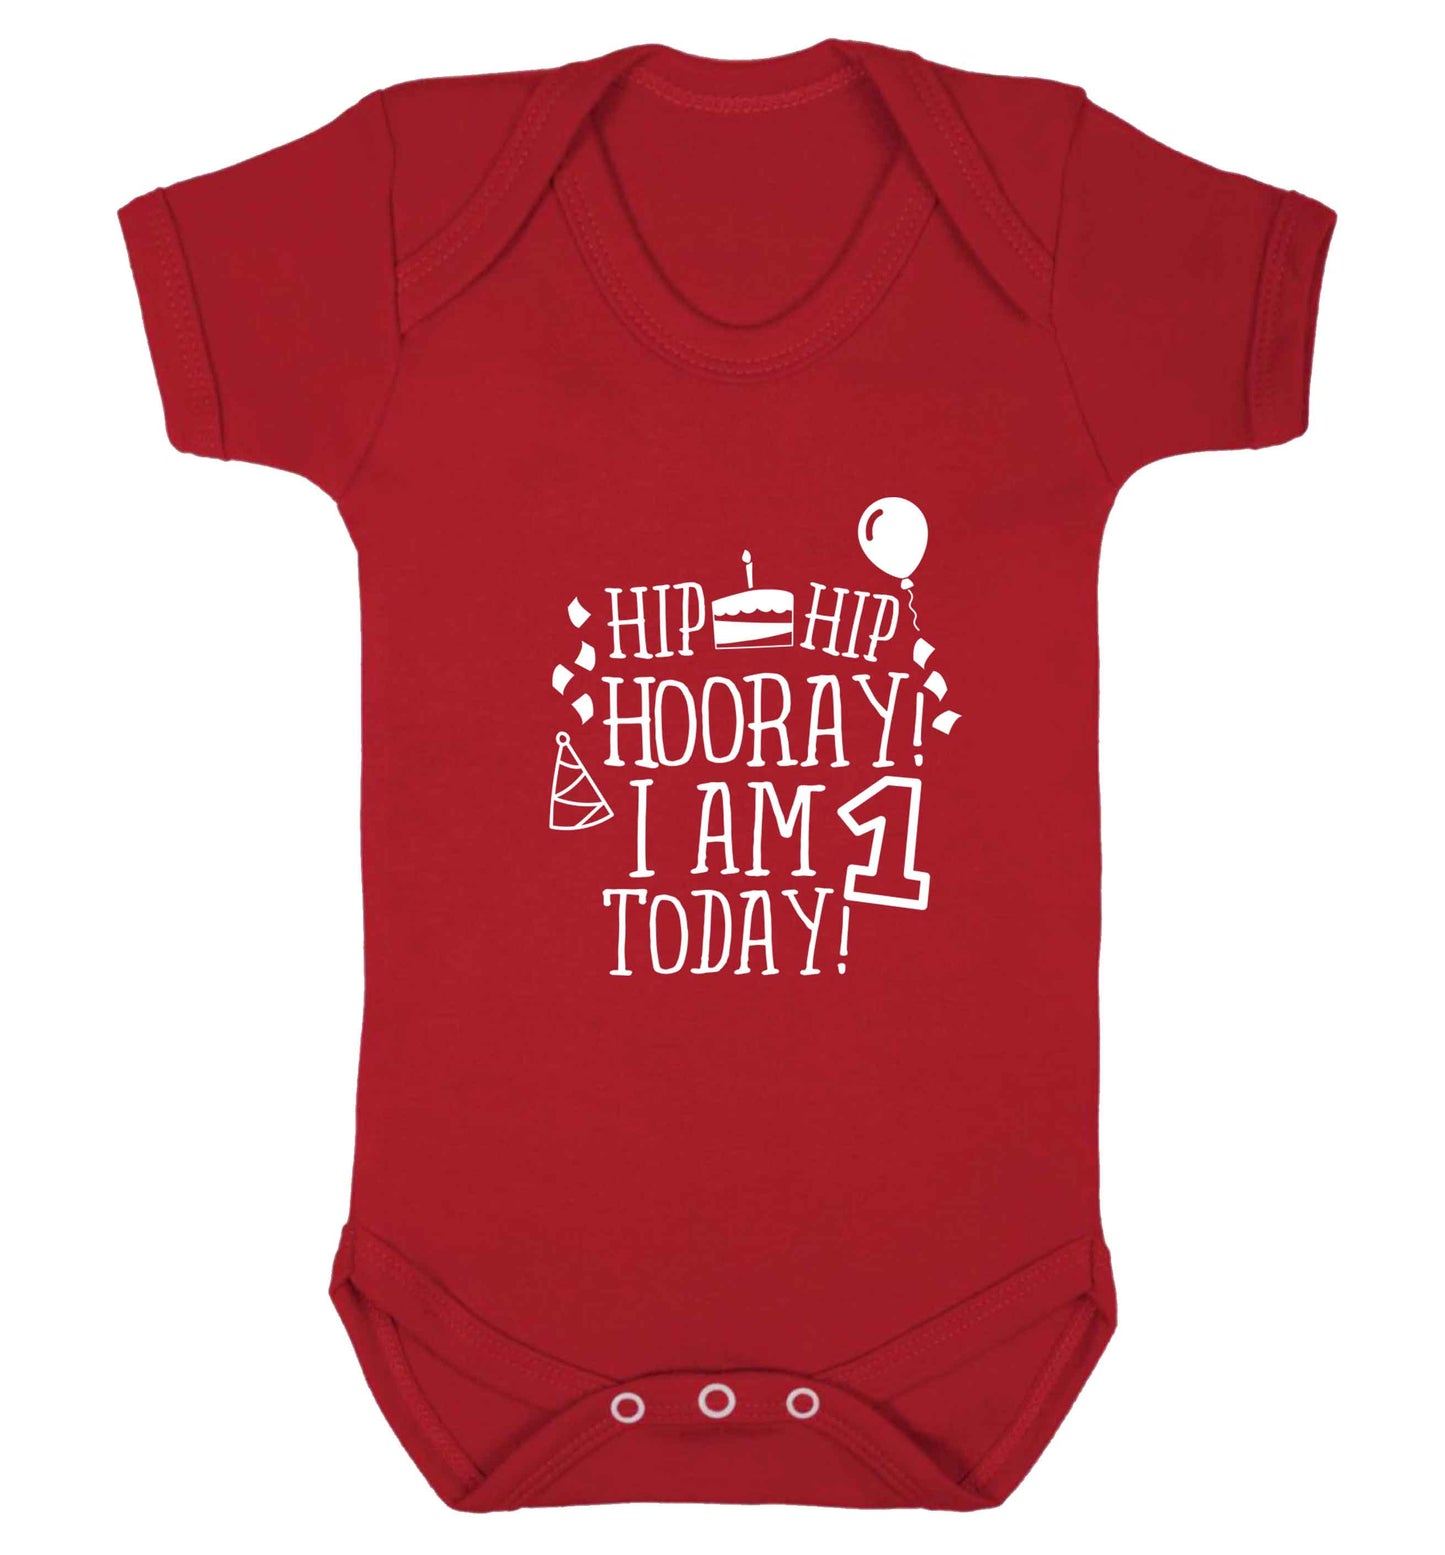 You're 2 Today baby vest red 18-24 months